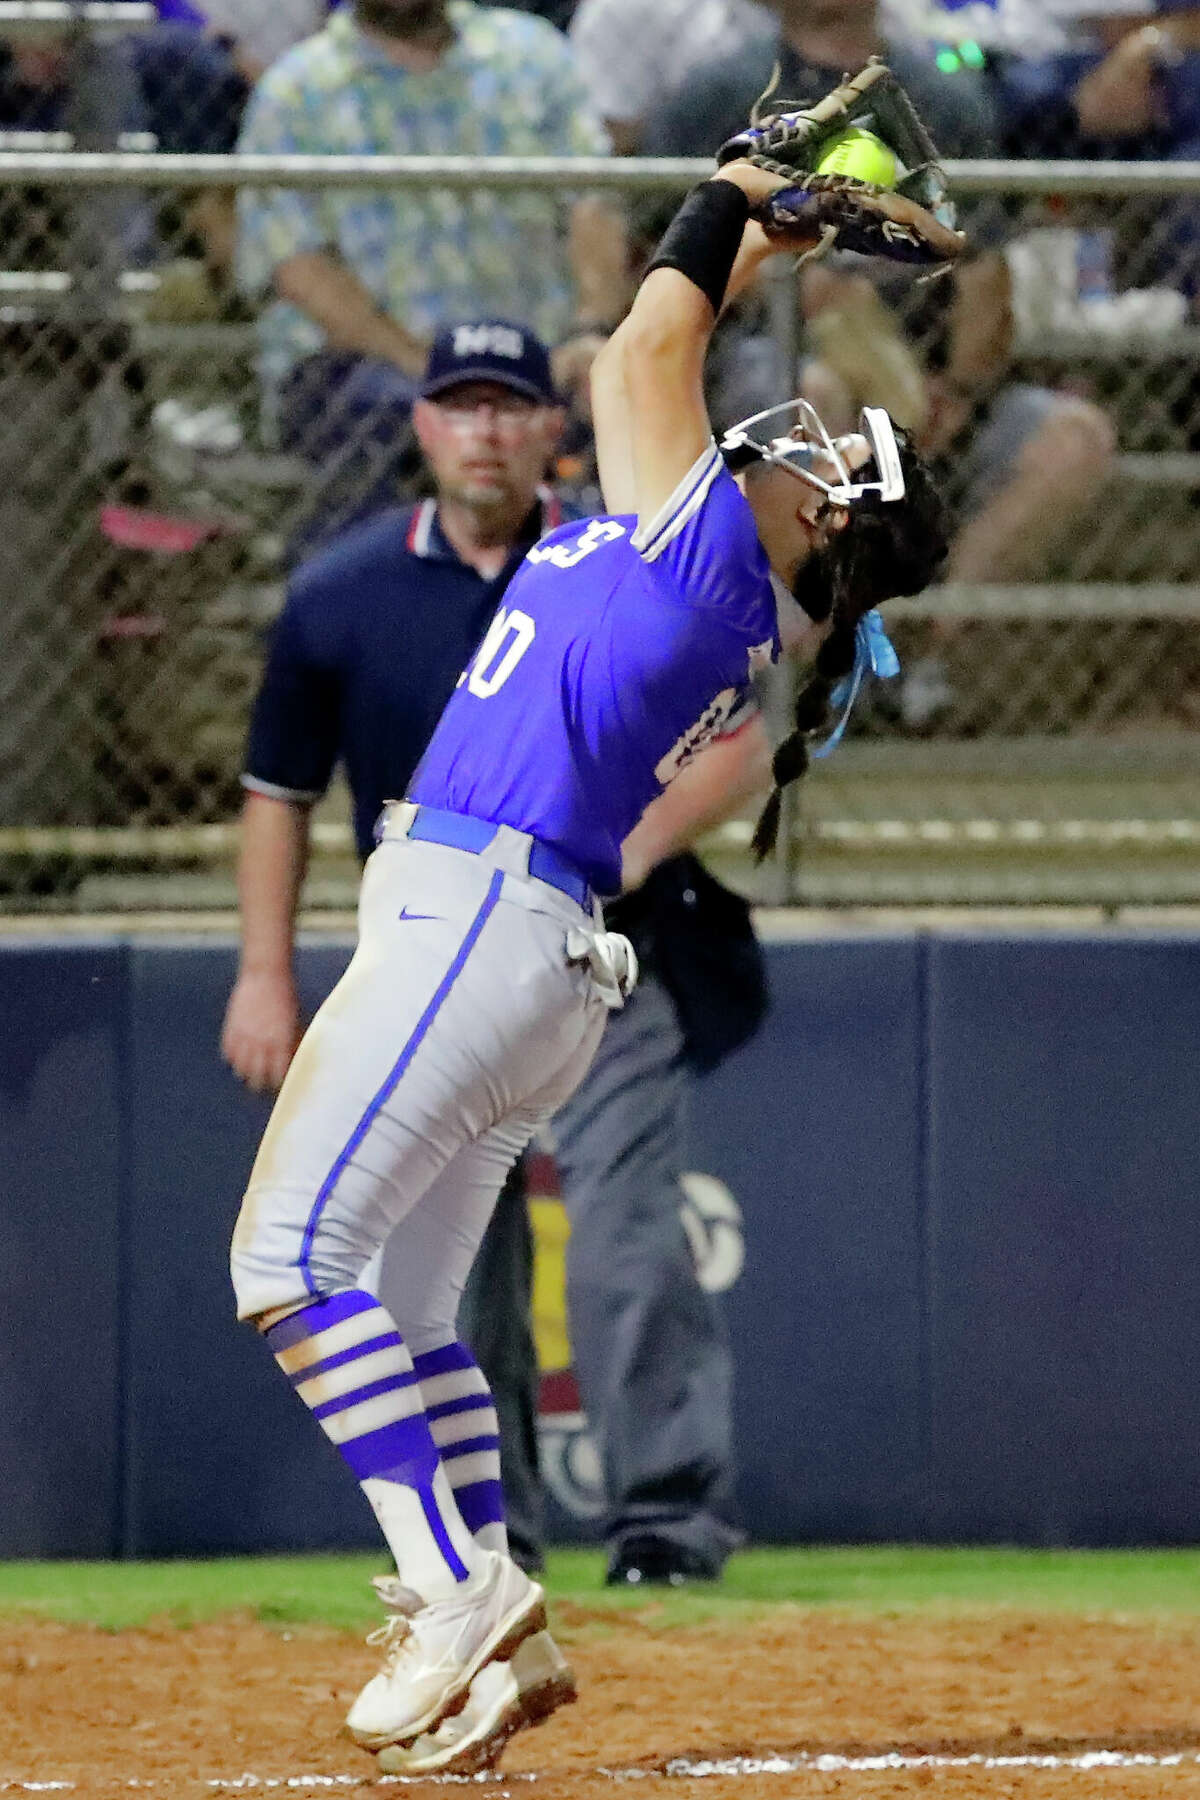 Barbers Hill third base player KateLynn Cooper makes the infield foul line catch for the out against Foster during their Region III-5A softball playoff game Friday, May 6, 2022 at Dawson High School in Pearland, TX.